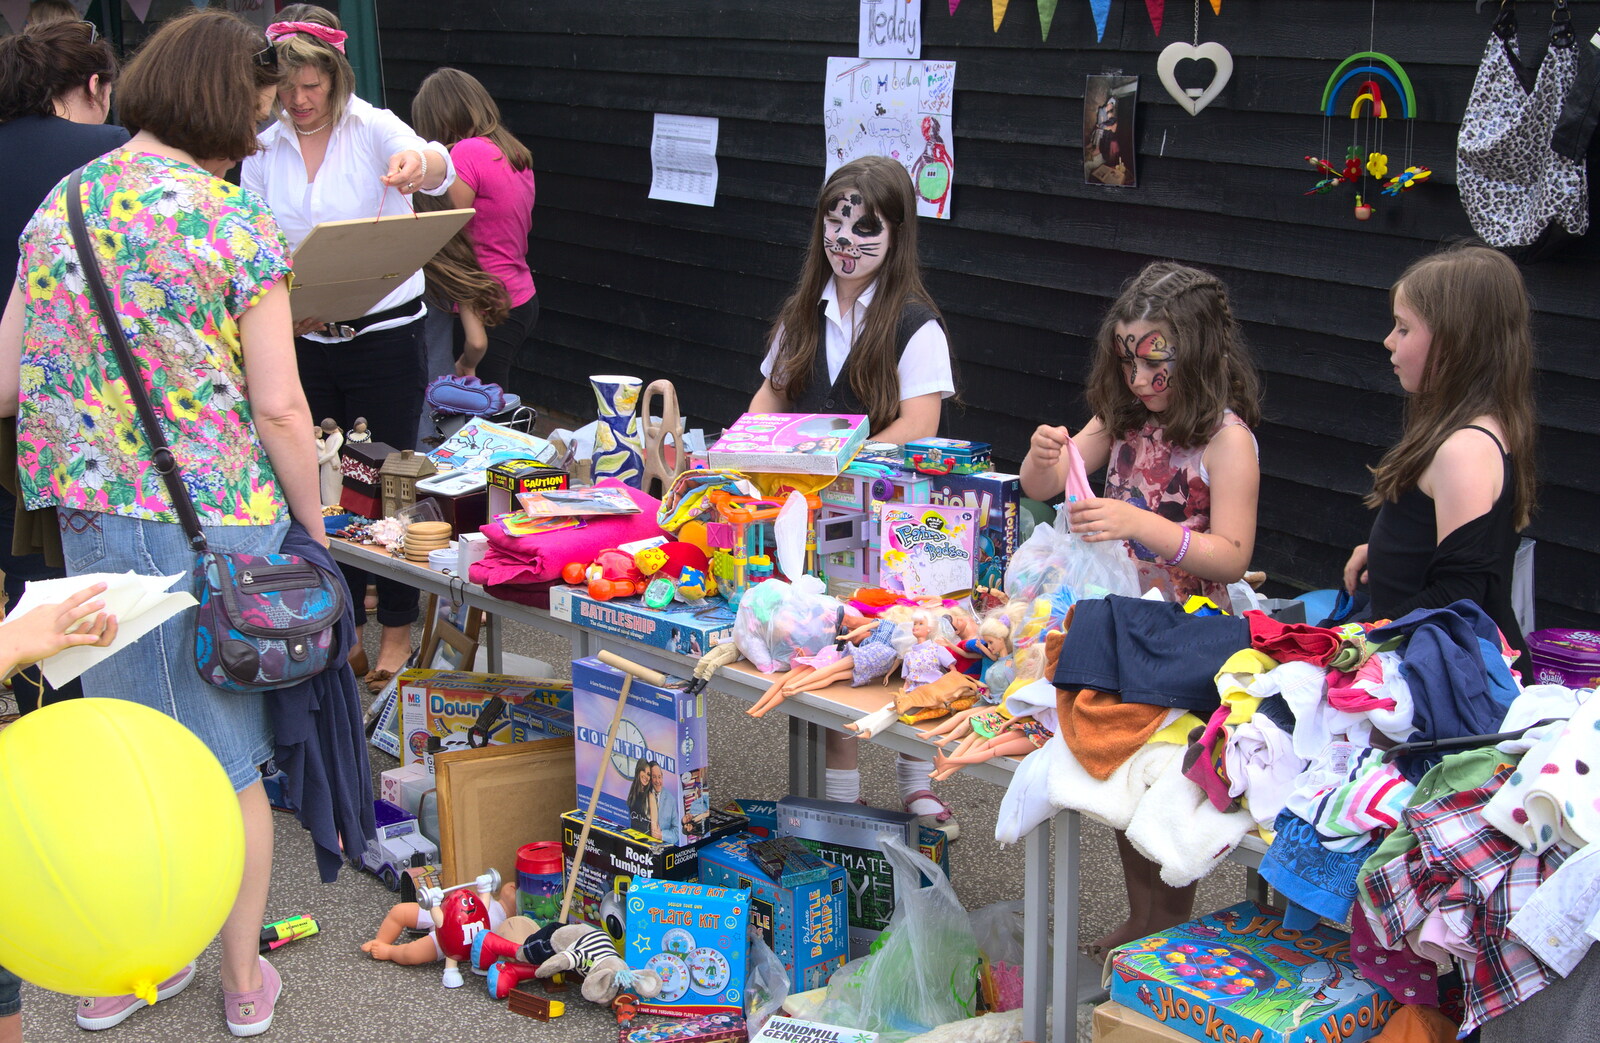 Bric a brac stall from St. Peter and St. Paul's School Summer Fete, Eye, Suffolk - 12th July 2014